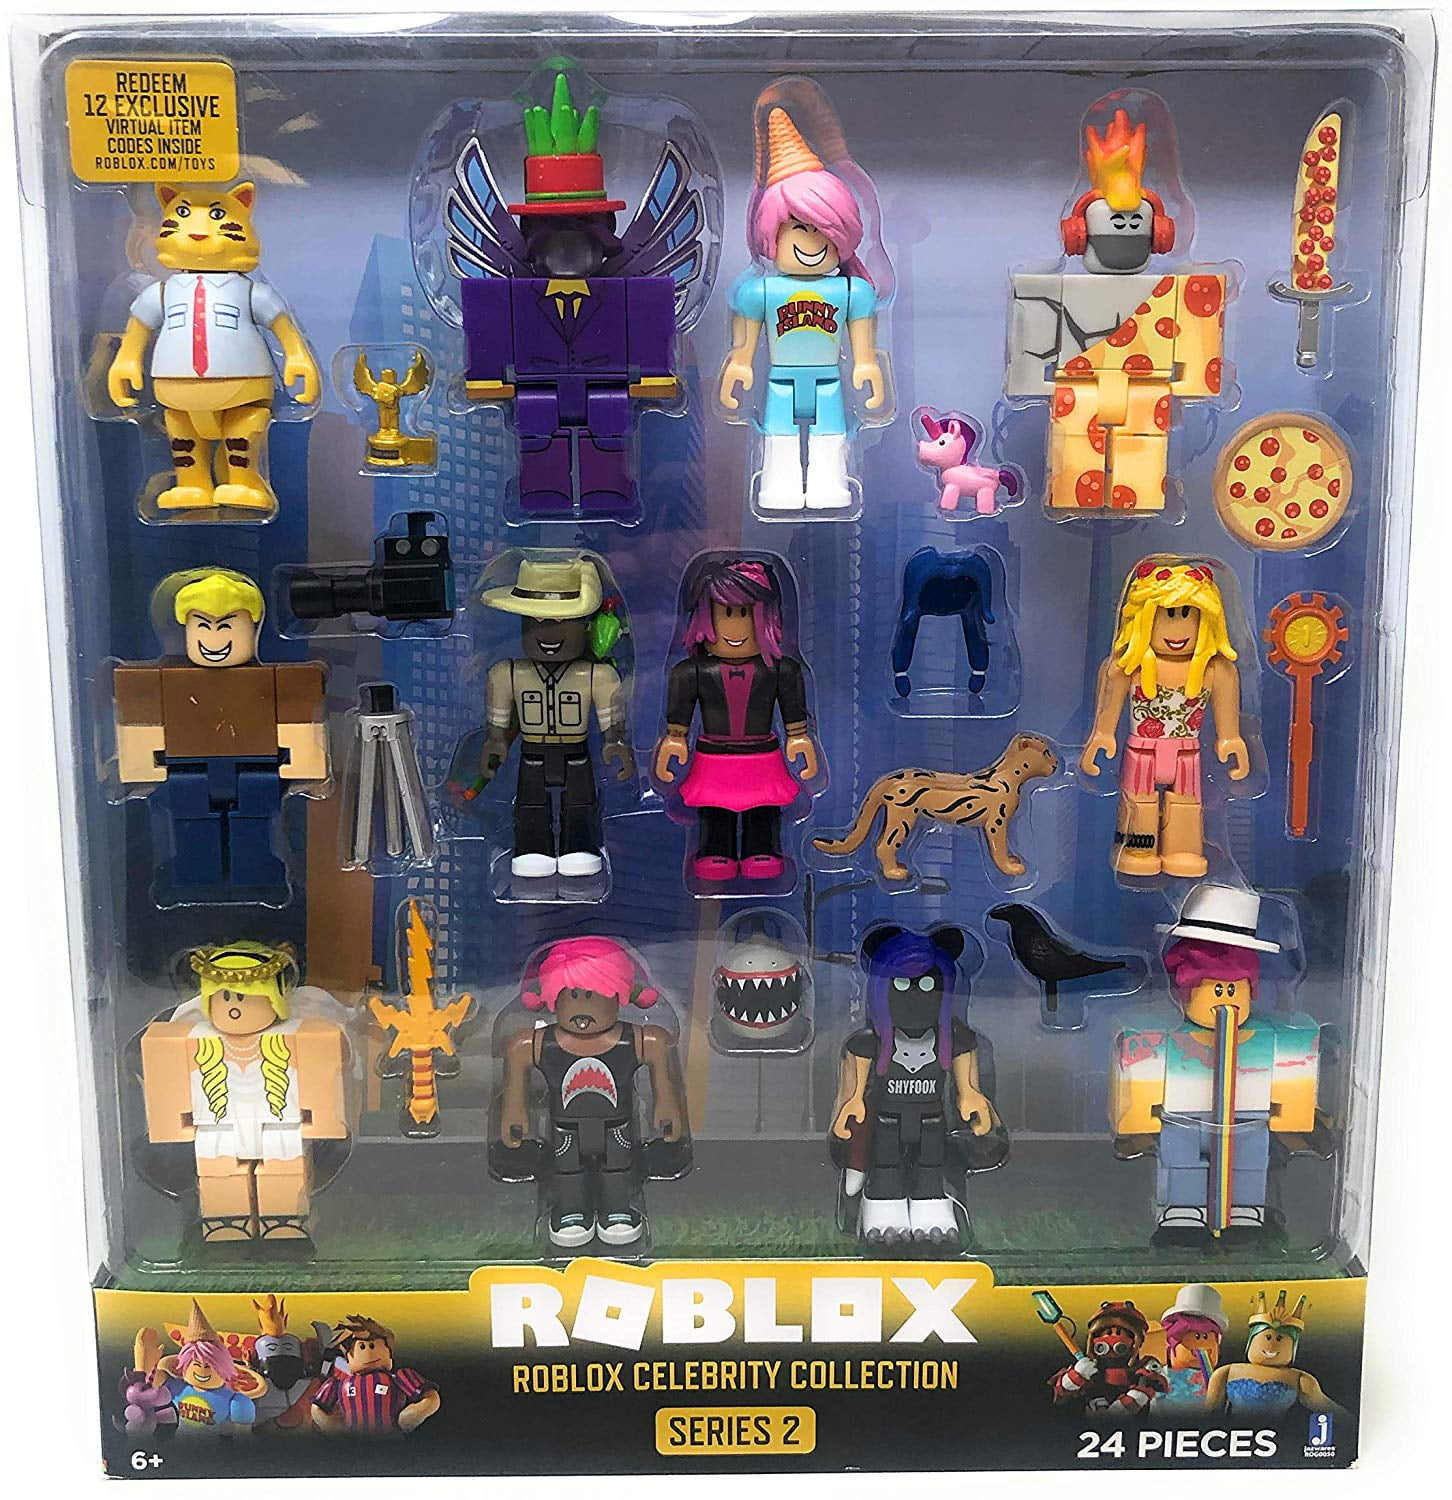 Roblox Series 2 Roblox Celebrity Collection 24 Piece Set Walmart Com Walmart Com - roblox series 2 codes